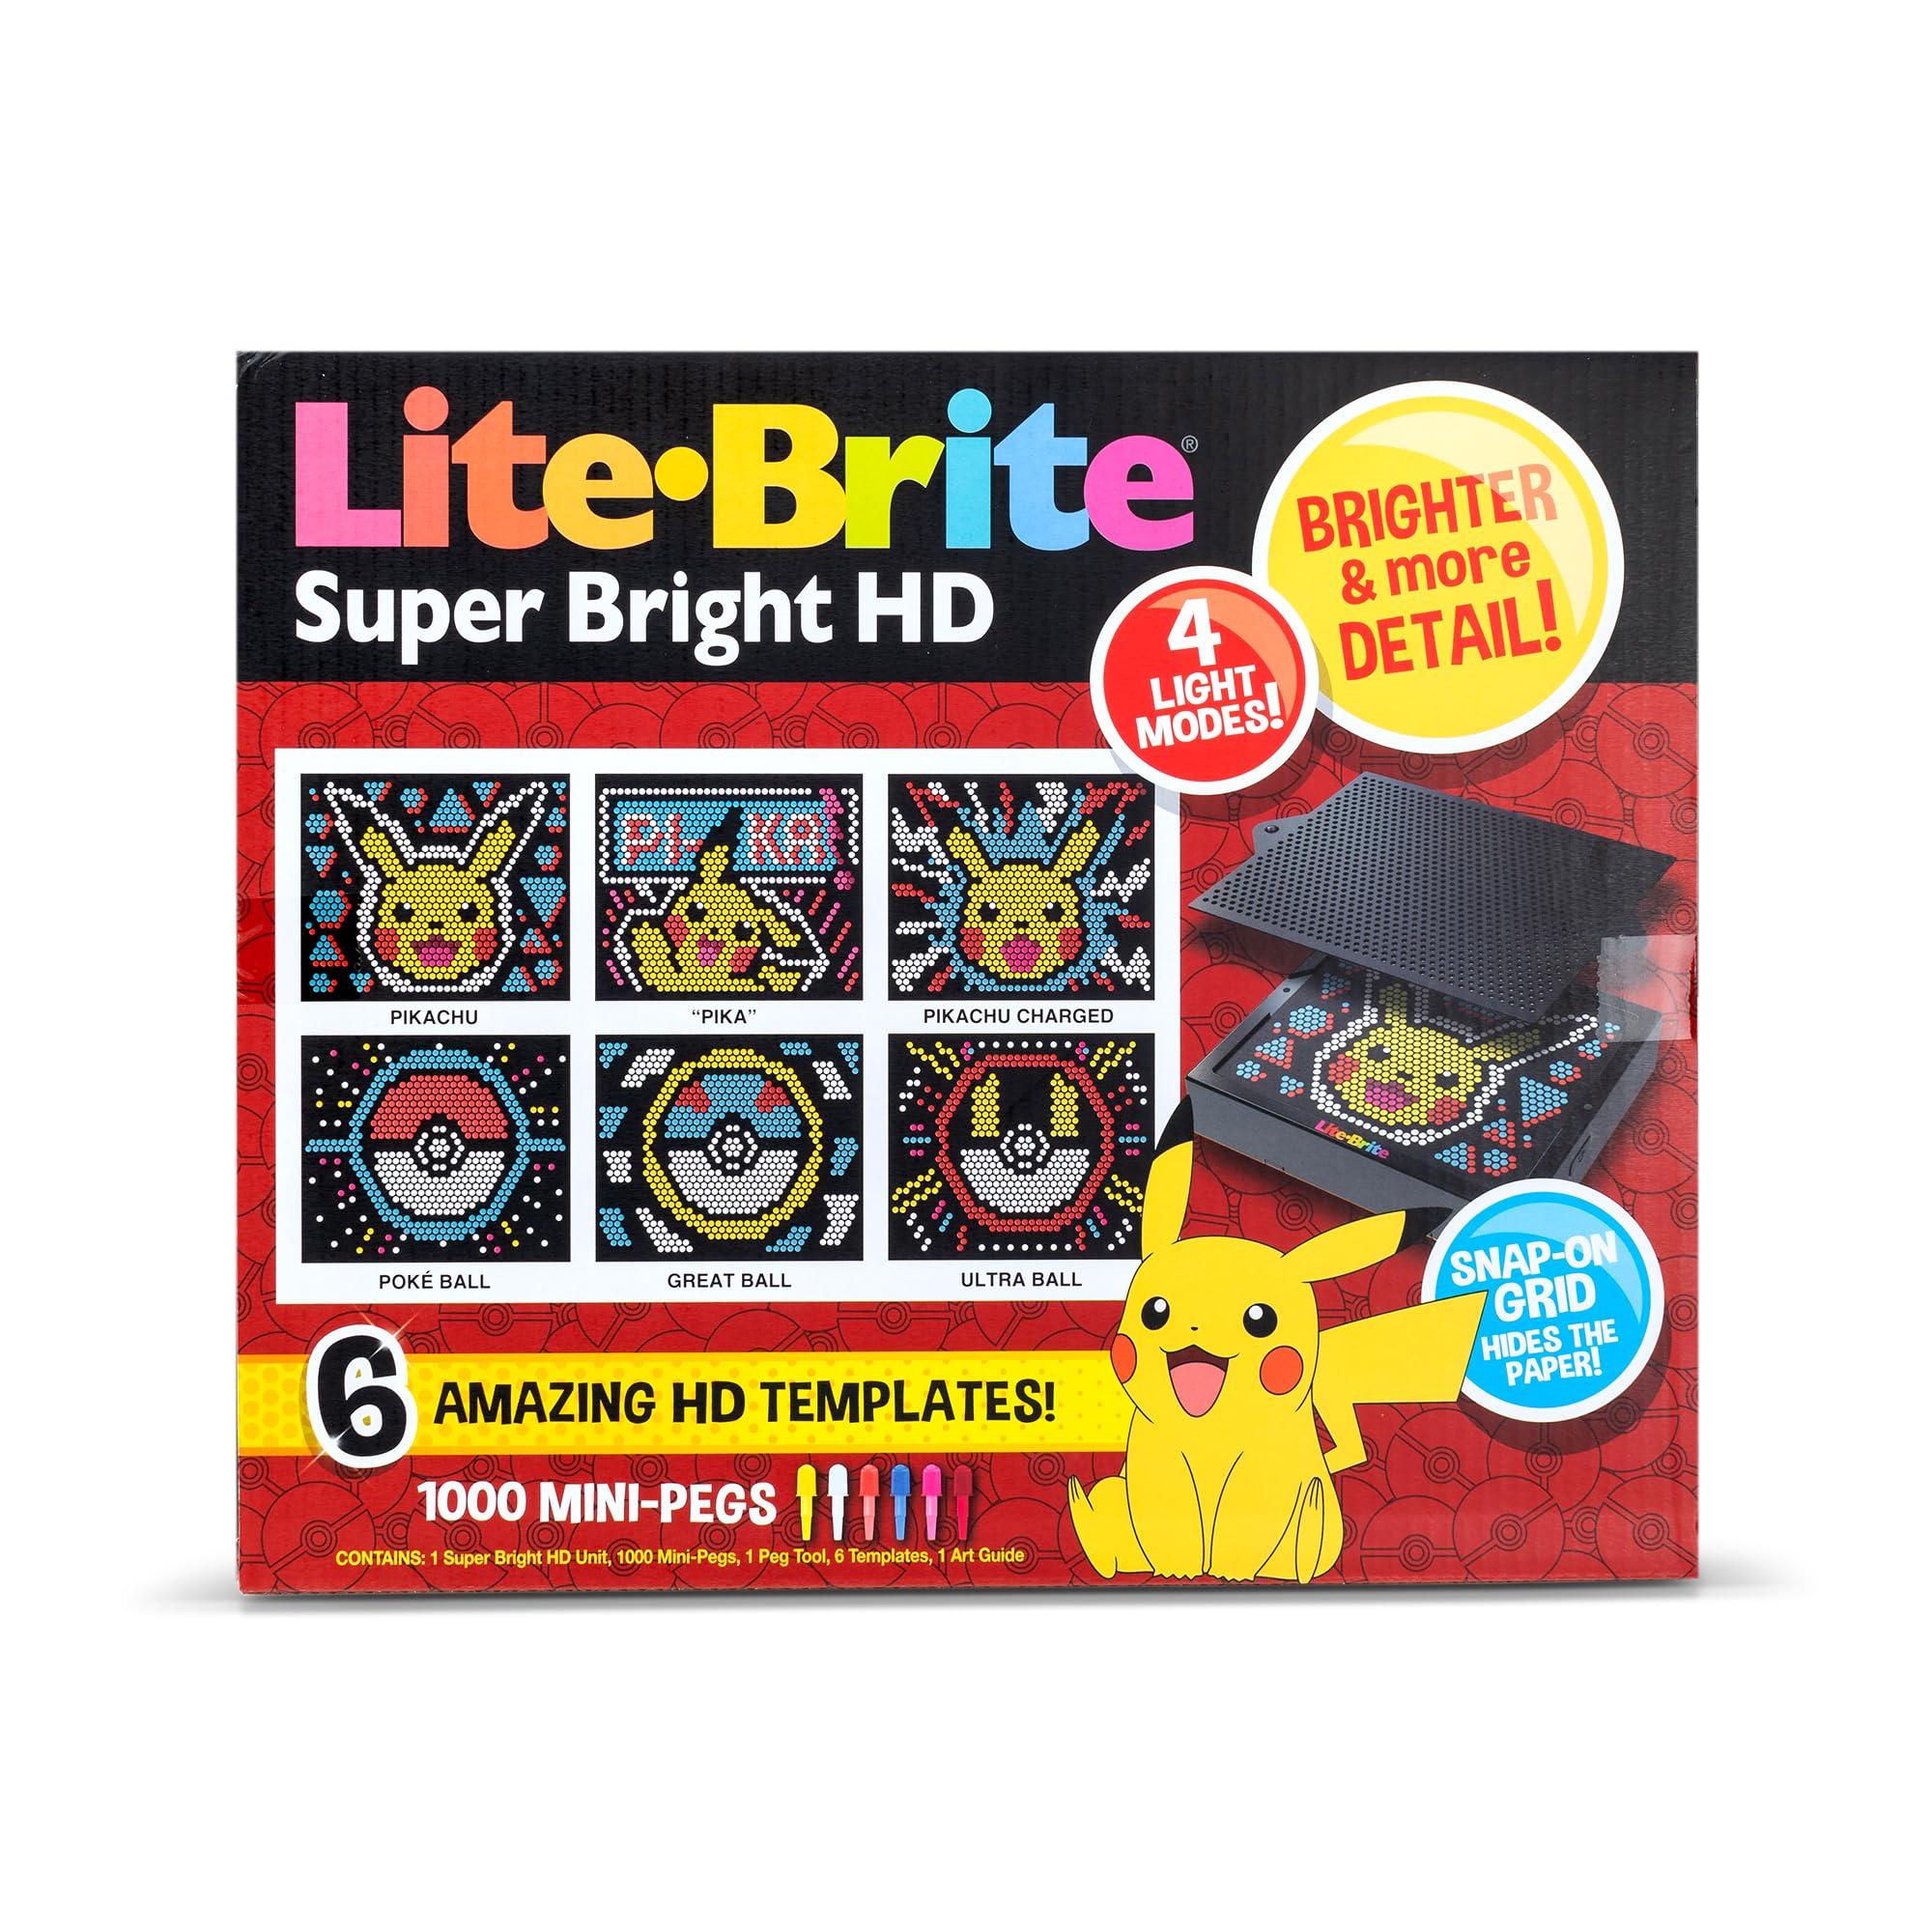 Lite-Brite Super Bright HD, Pokemon Edition - Create Art with Light, Enhances Creativity, Gift for Boys and Girls Ages 6+